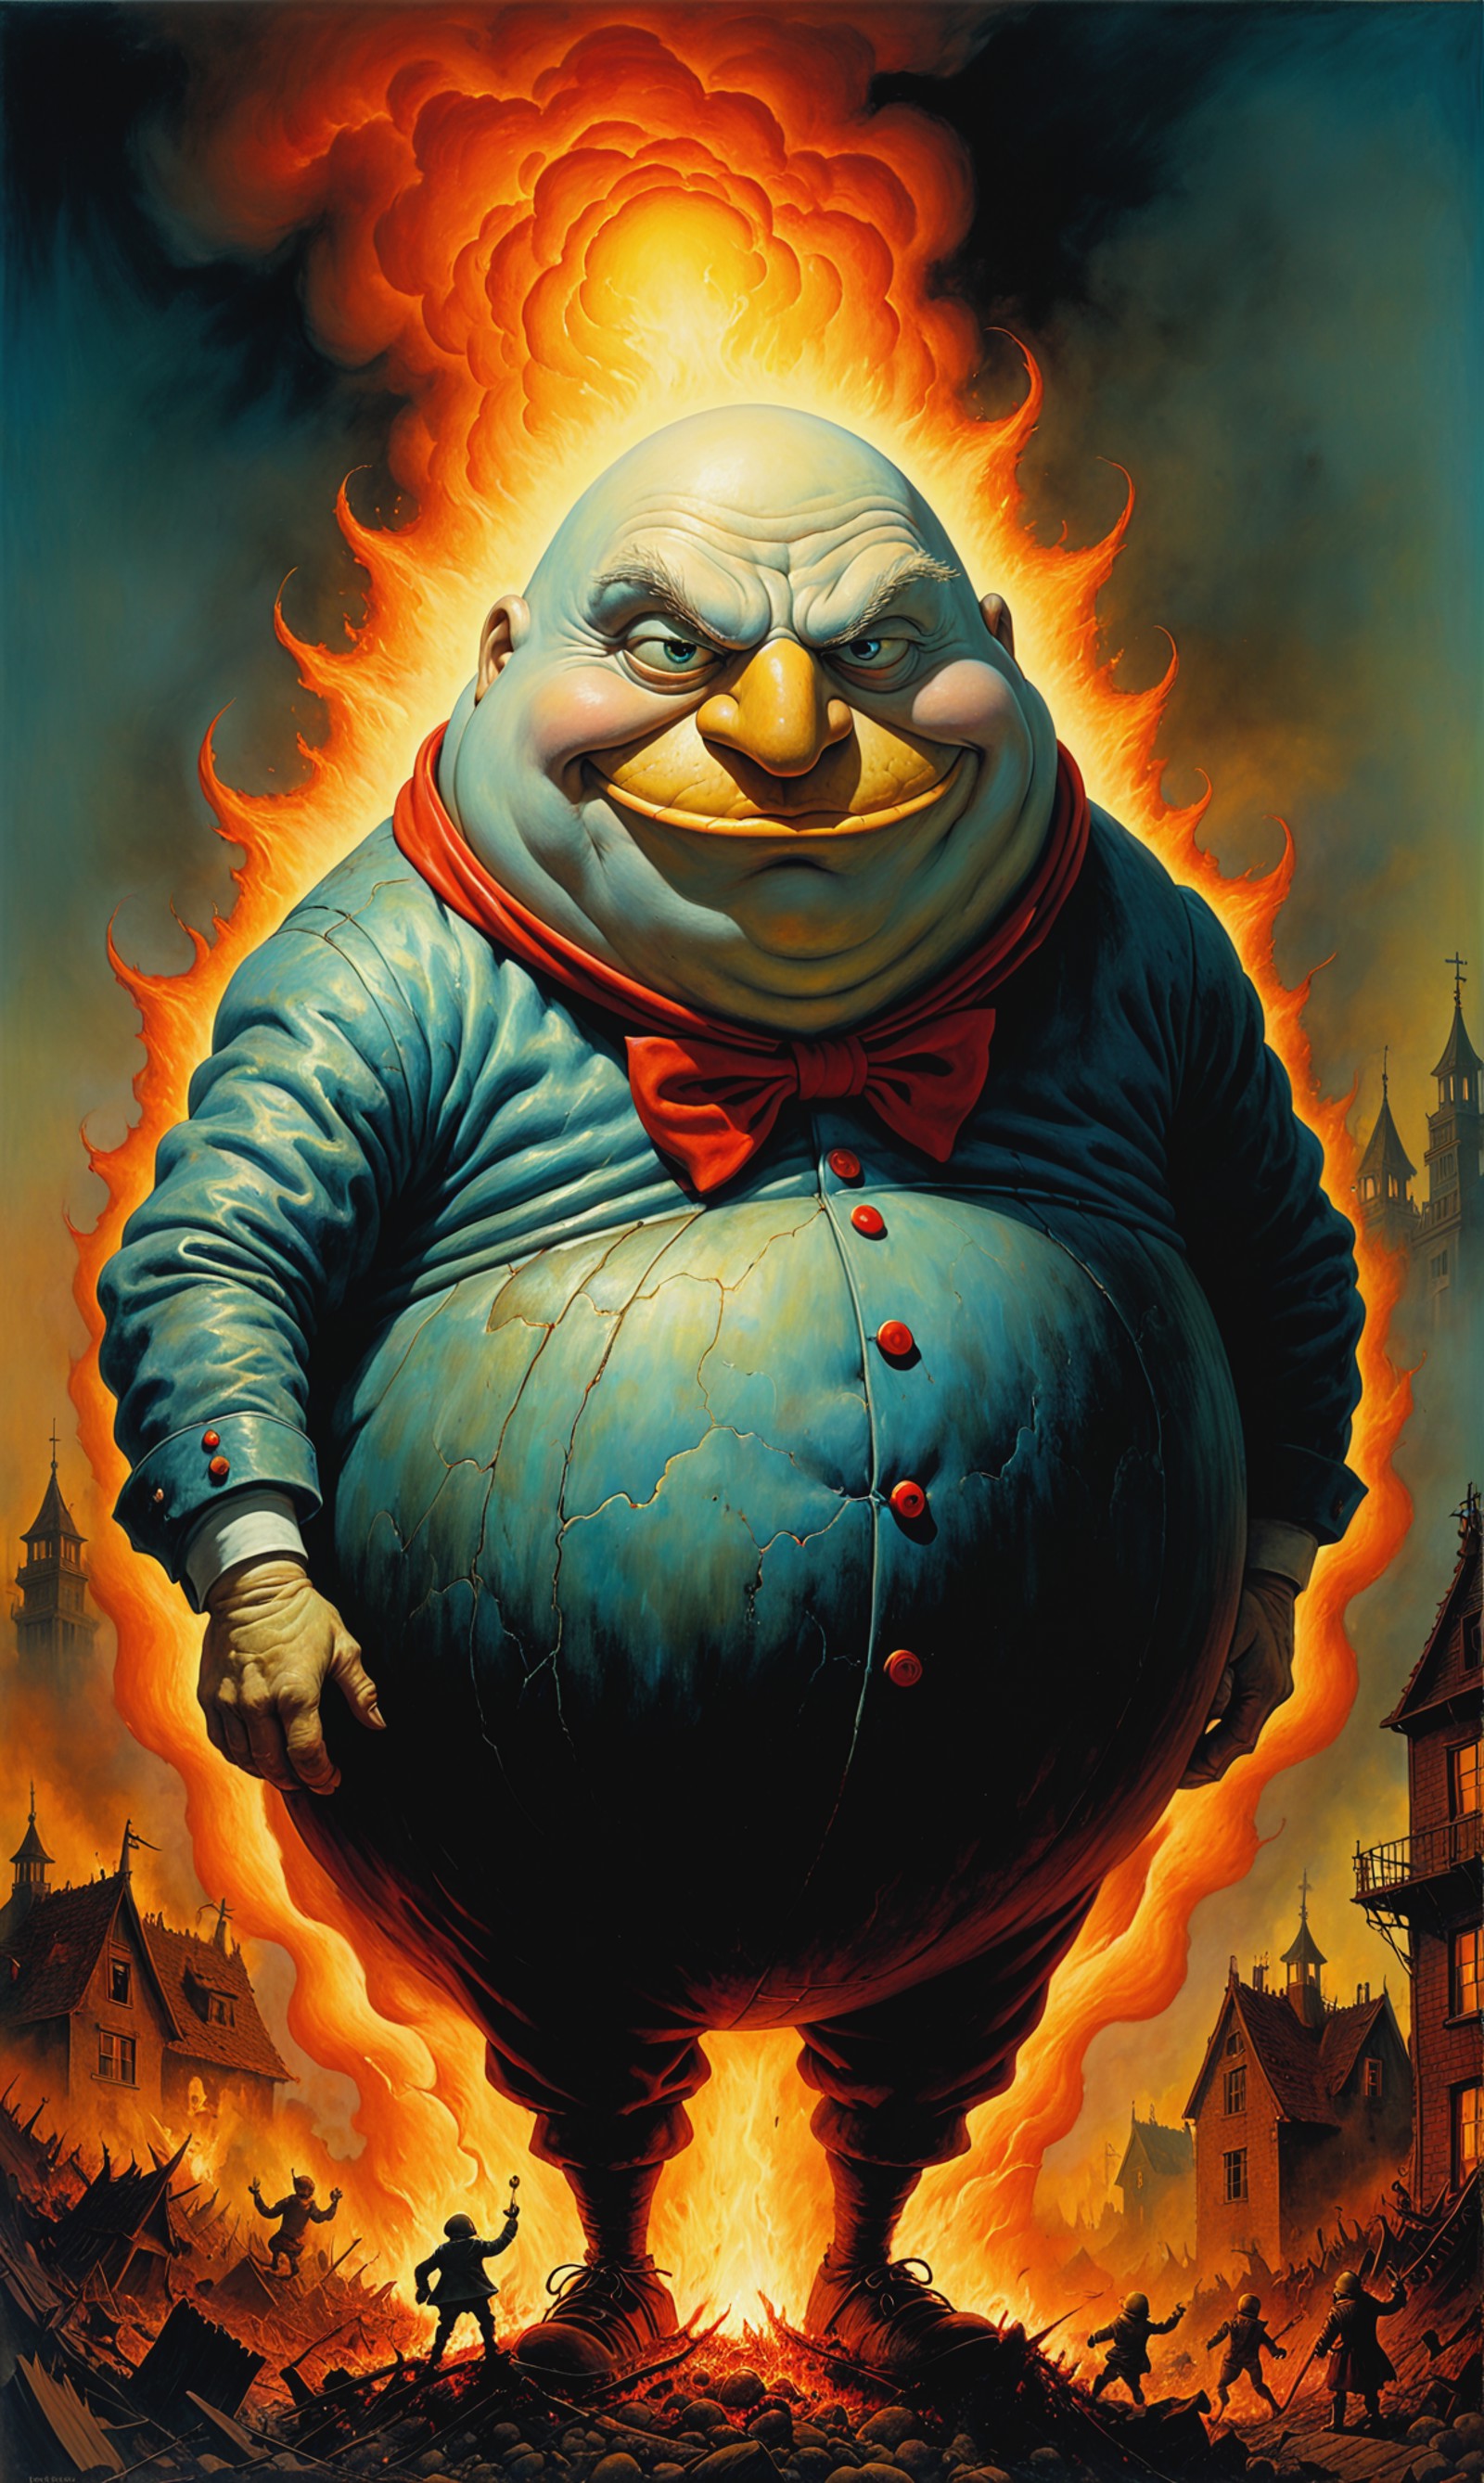 Negotiating nightmare frequencies, evil humpty dumpty caricature monstrosity burning in hell, by Dr Suess and Zdzislaw Bek...